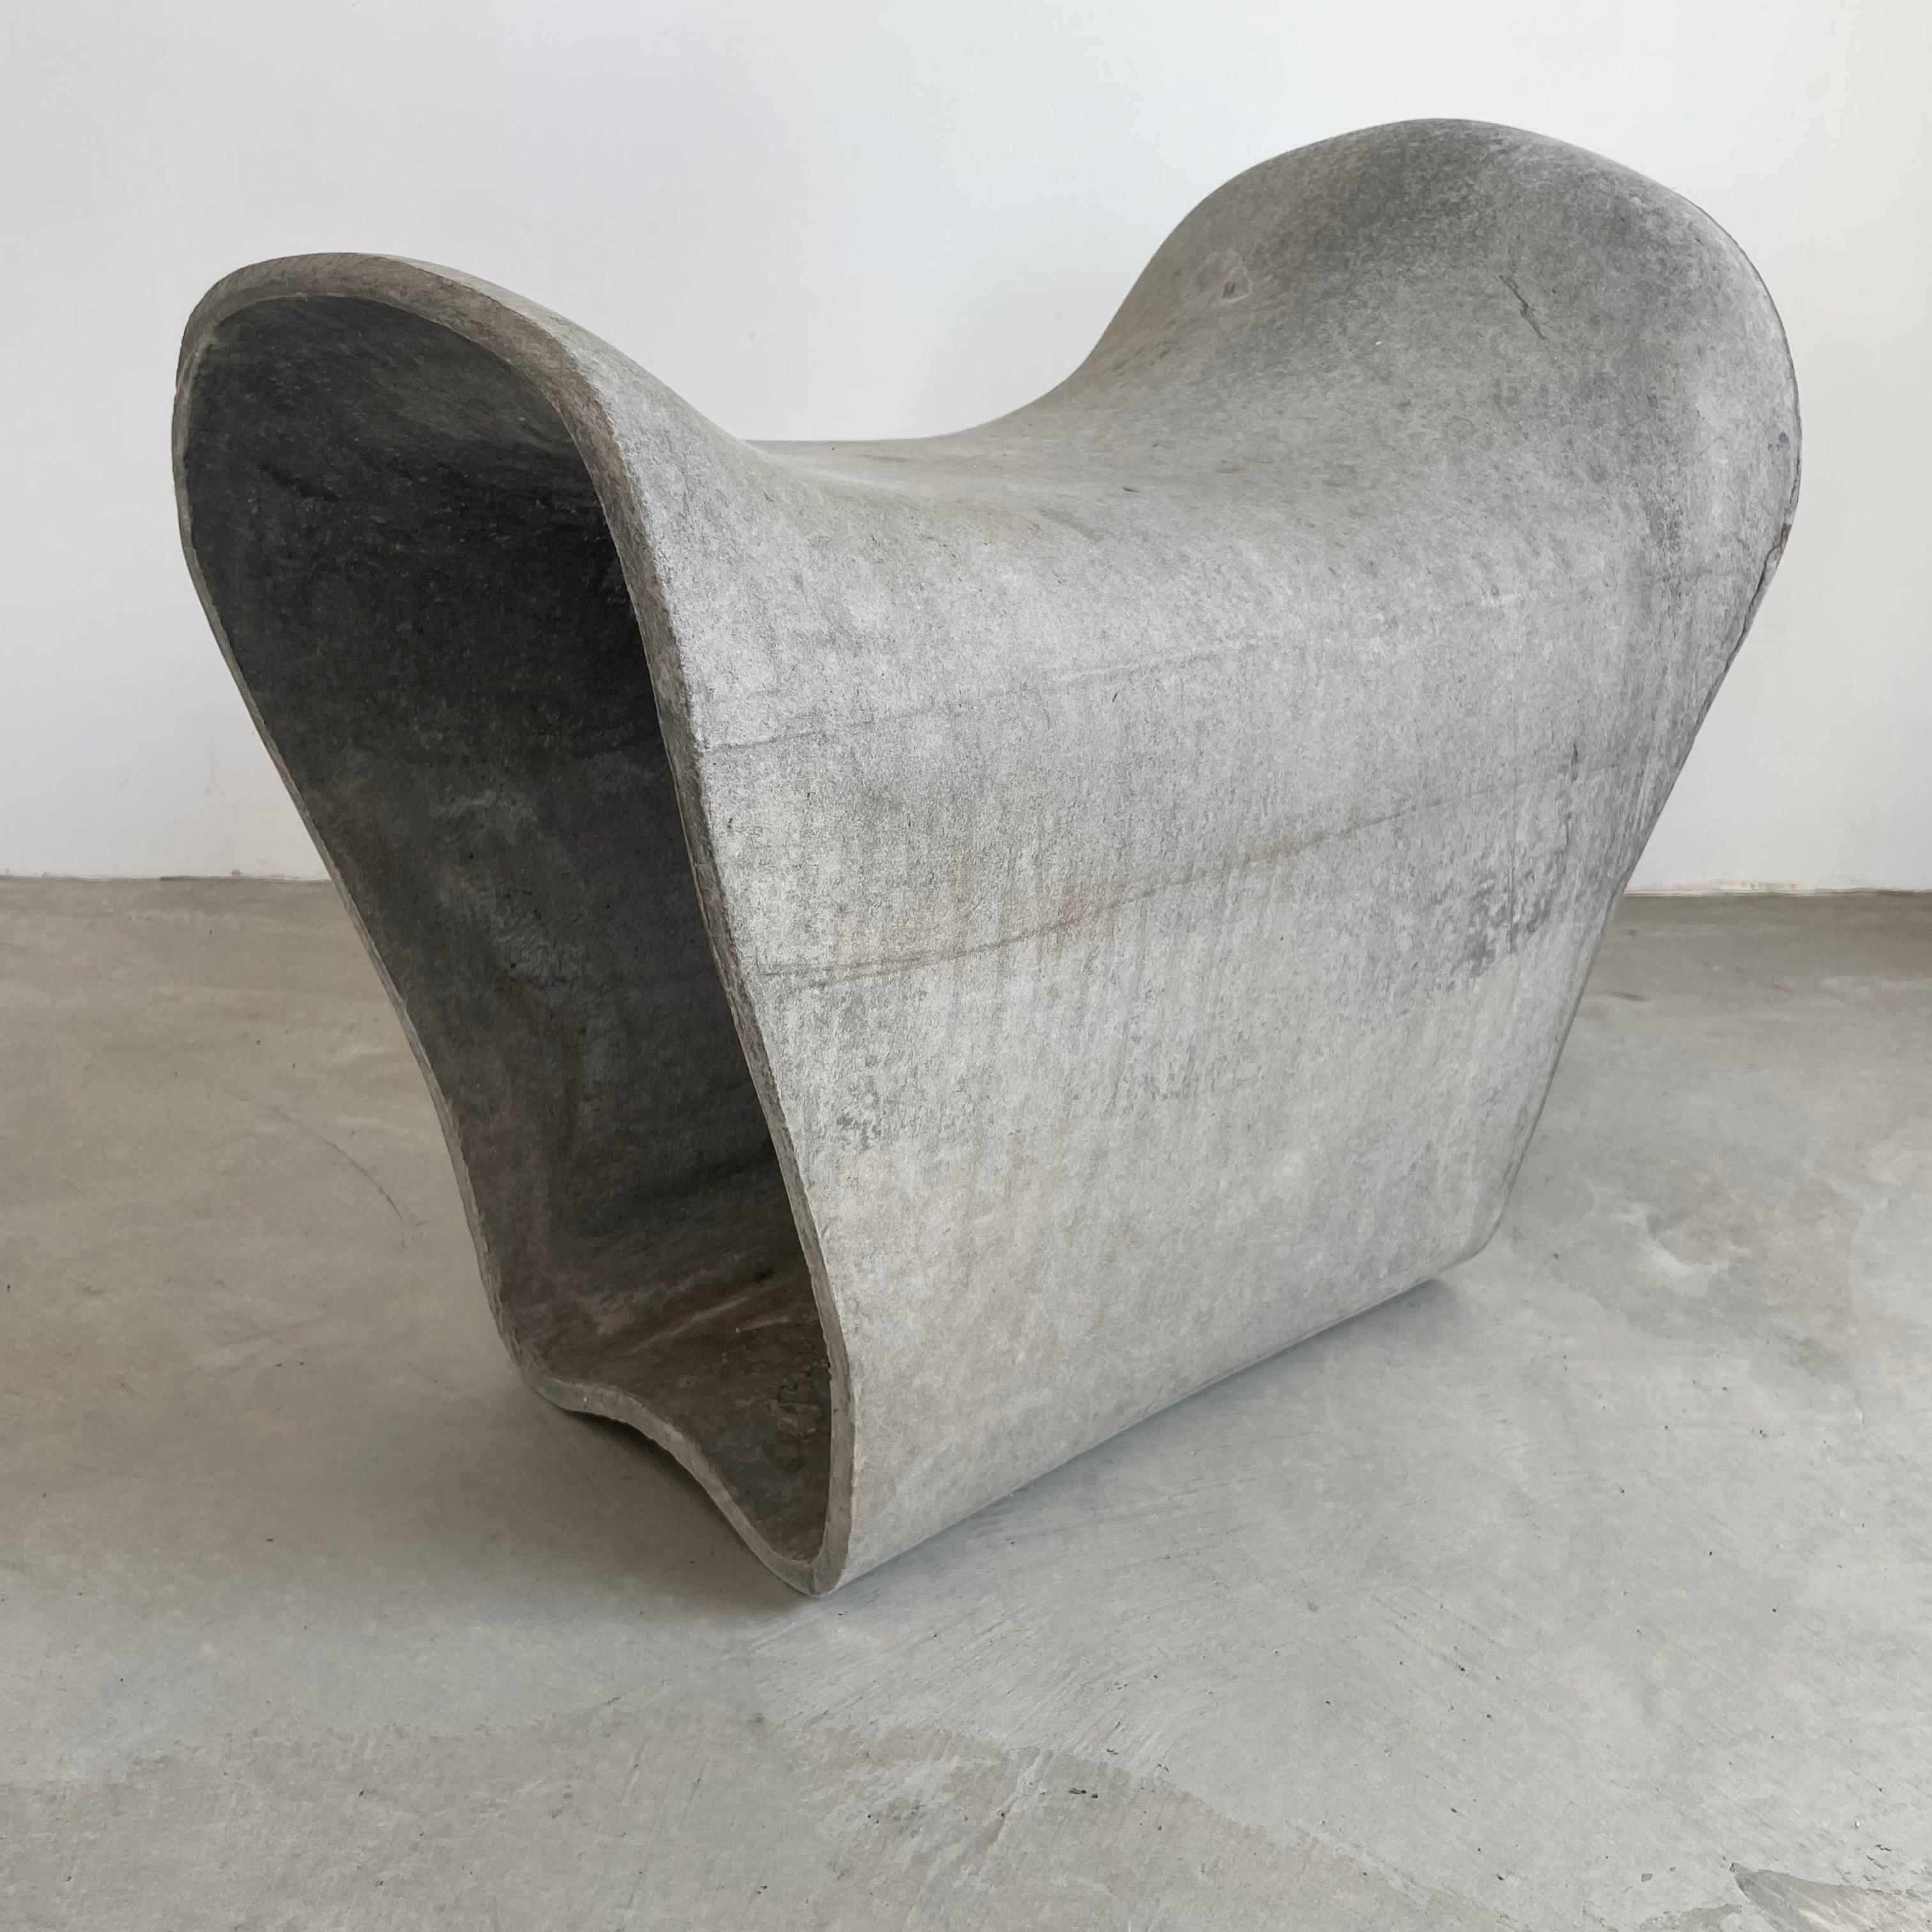 Rare concrete stool by Willy Guhl in the shape of a saddle. Hand-made in Switzerland in the 1960s, Excellent condition and design. Great sculptural pieces with beautiful soft lines. Surprisingly comfortable. Perfect for indoors or outside. Priced